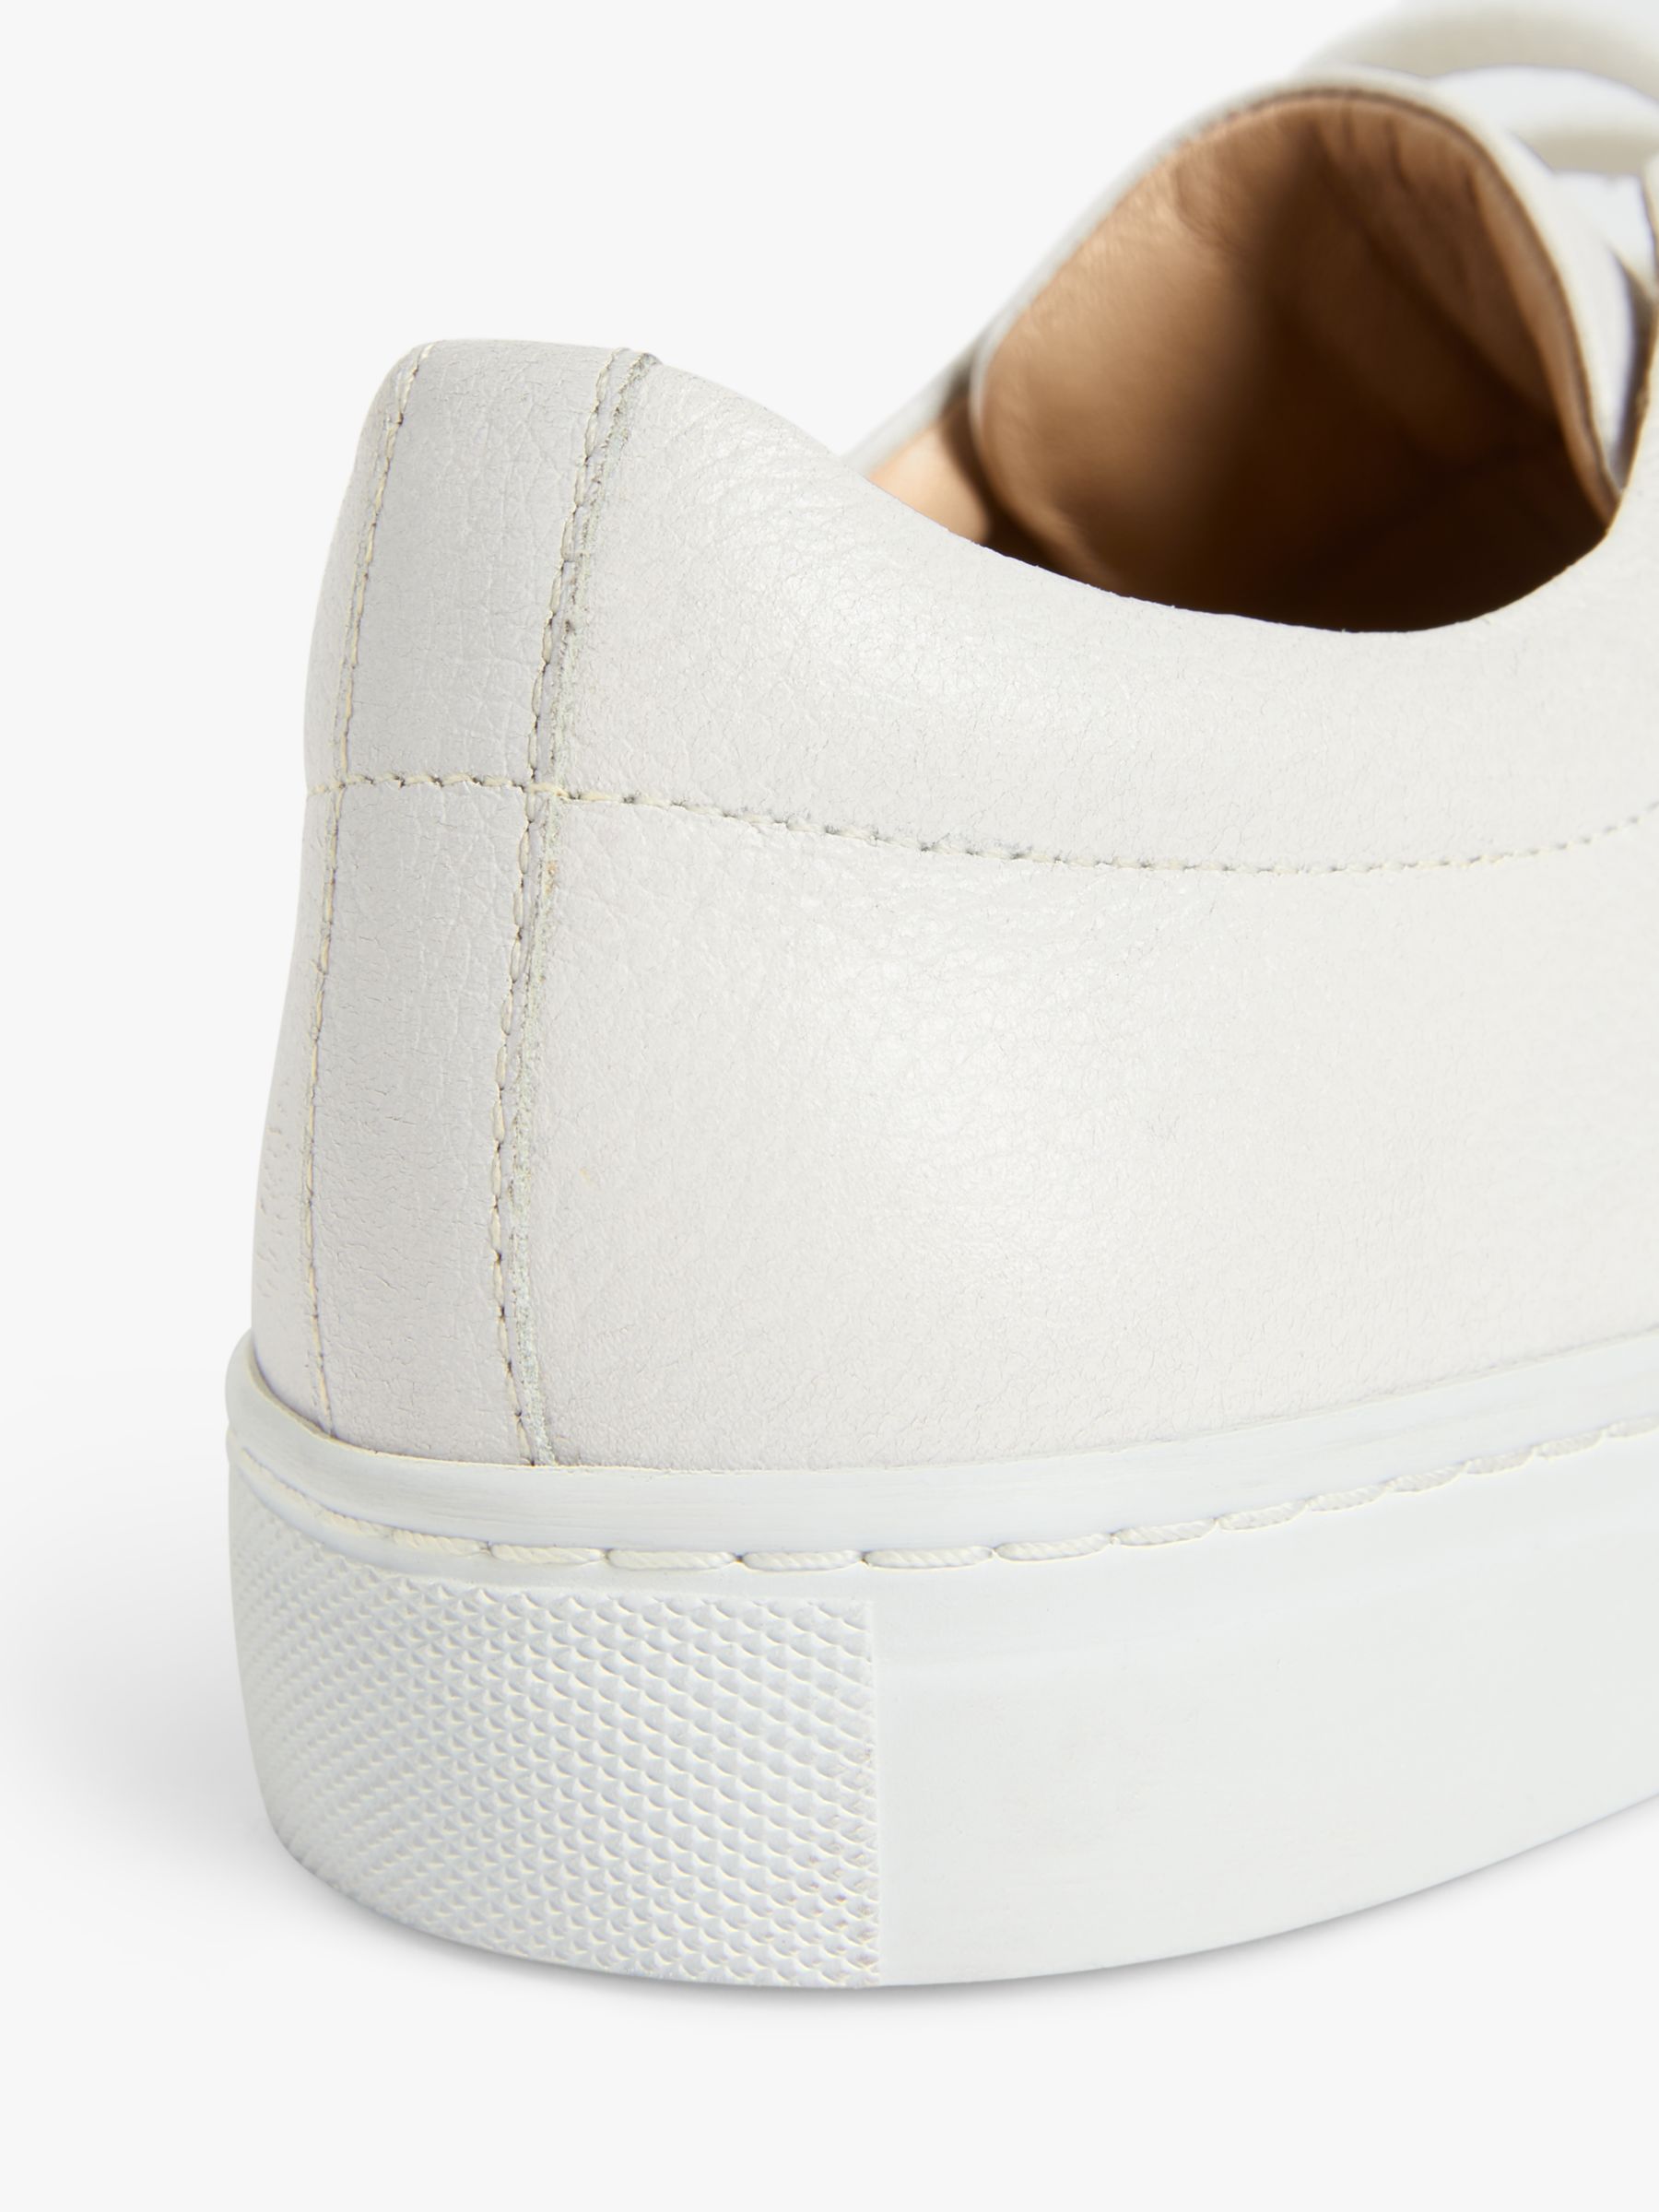 John Lewis Florette Wide Fit Leather Trainers, White, 3